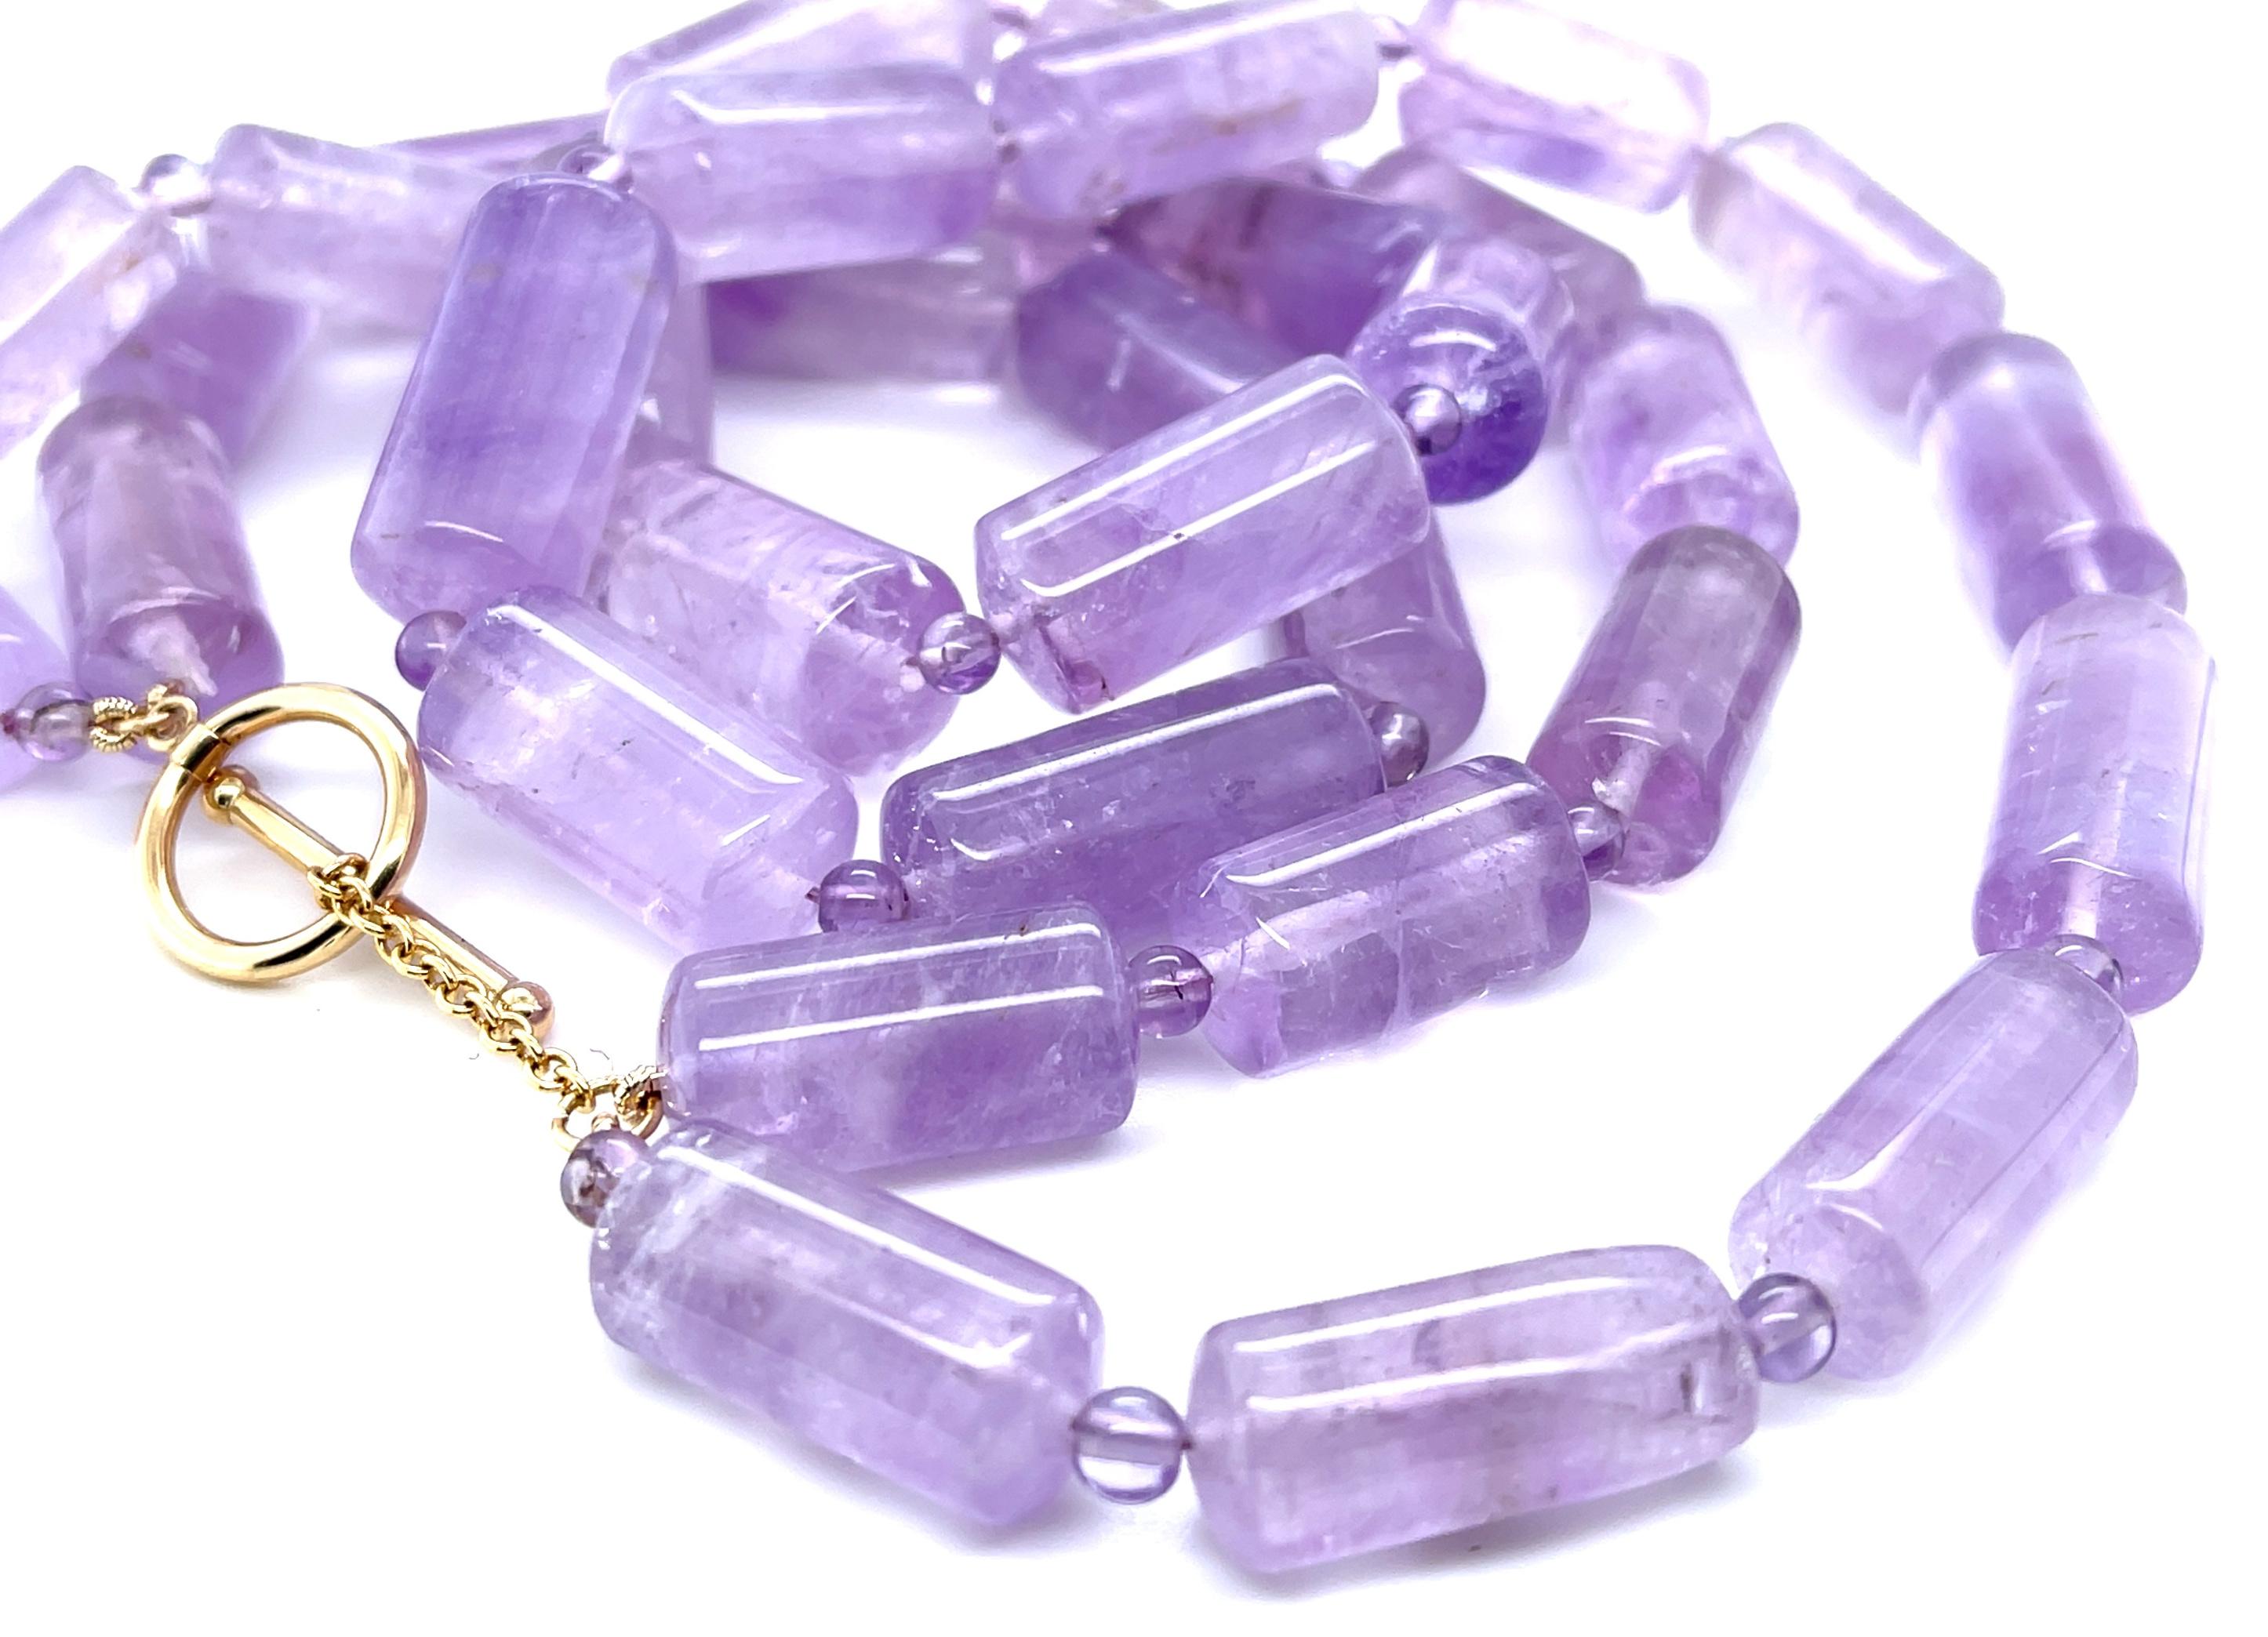 Artisan Rose de France Amethyst Cylinder Necklace, Double Strand with 14k Yellow Gold